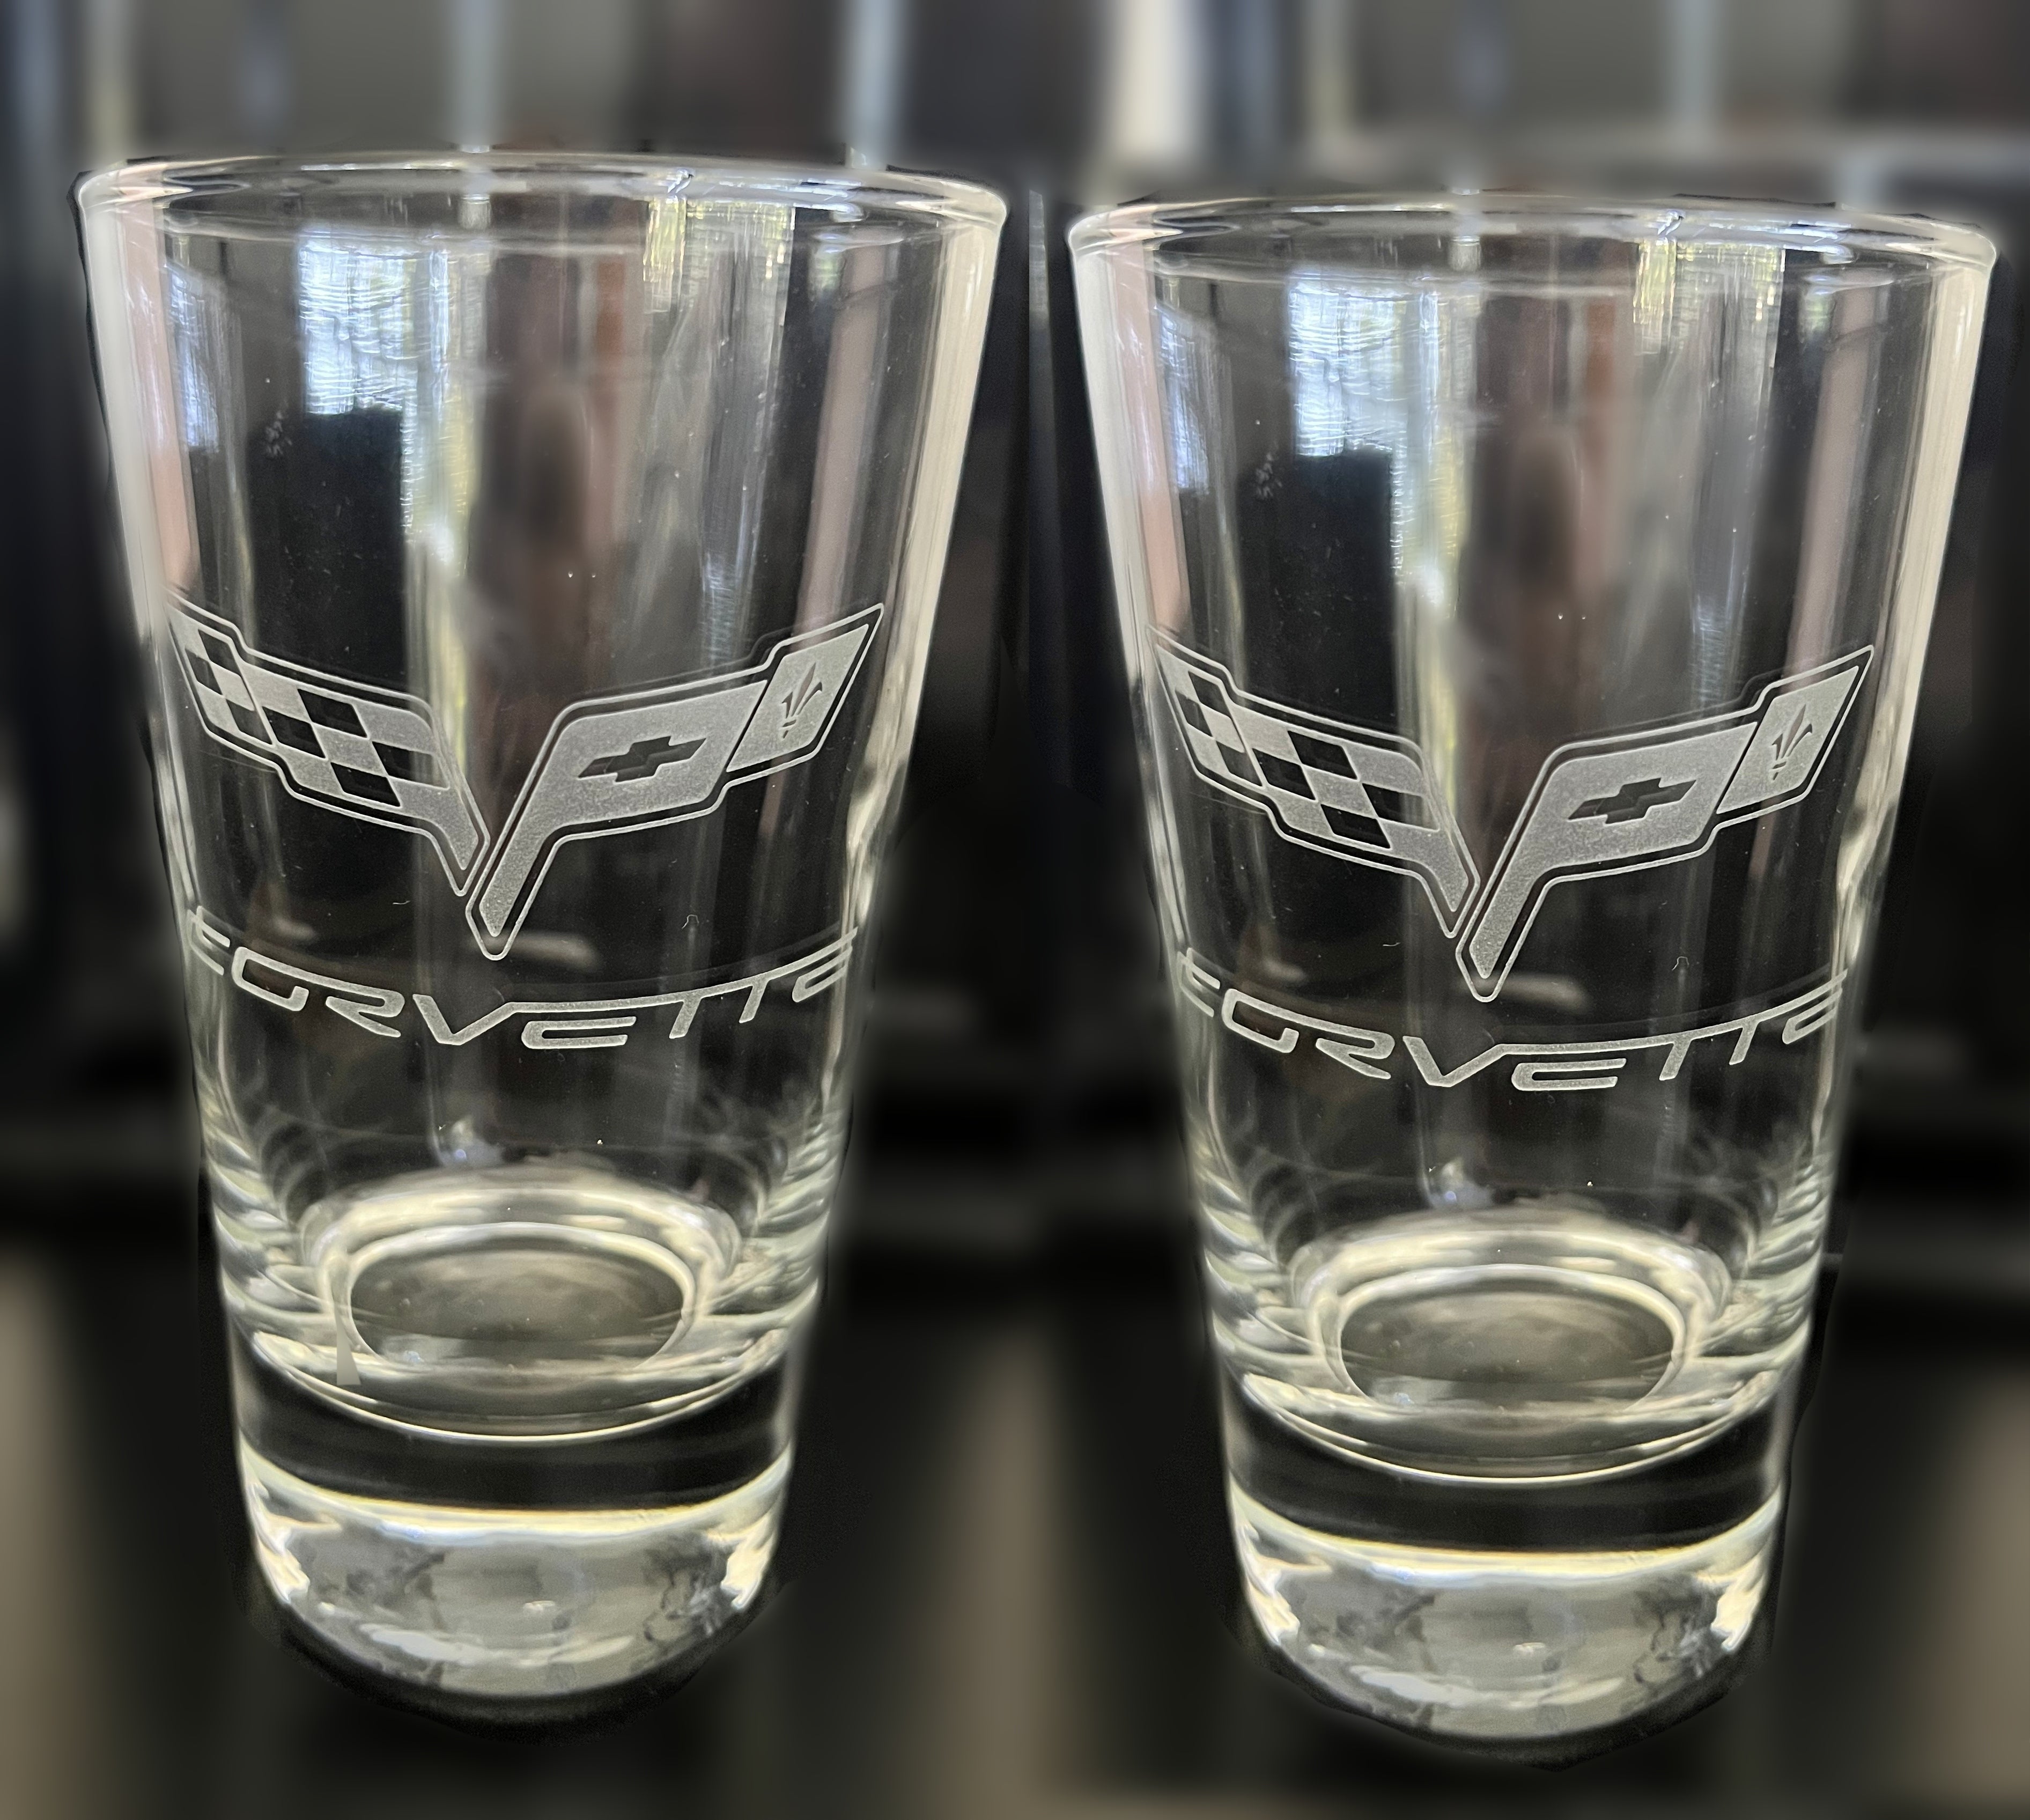 Clearance - C6 Corvette Tall Tapered Glassware: C6 Logo, Set of 2